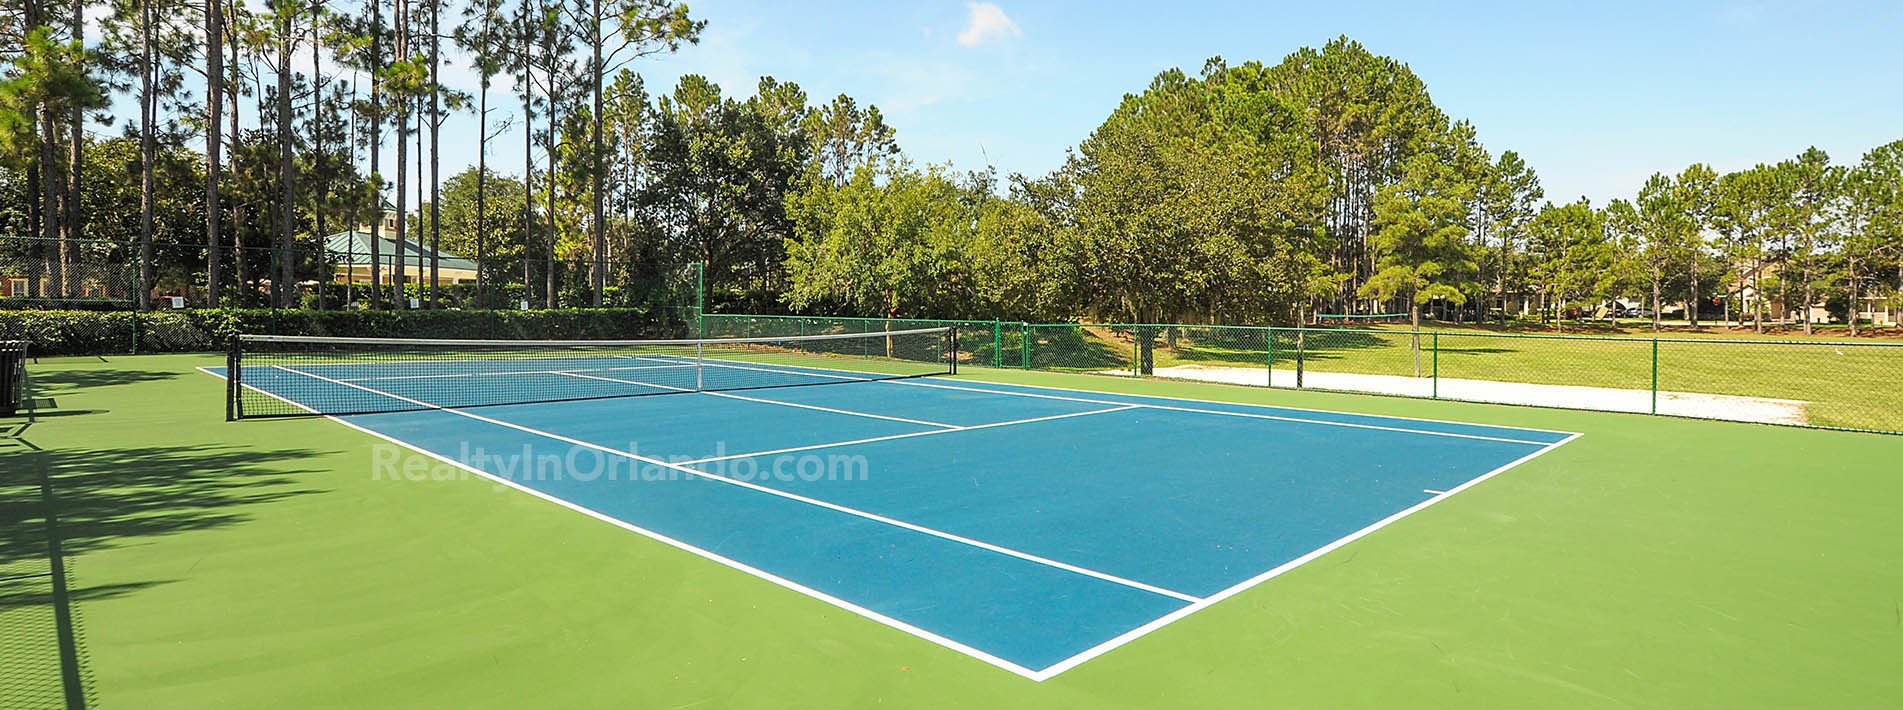 Lakes of Windermere Tennis Courts